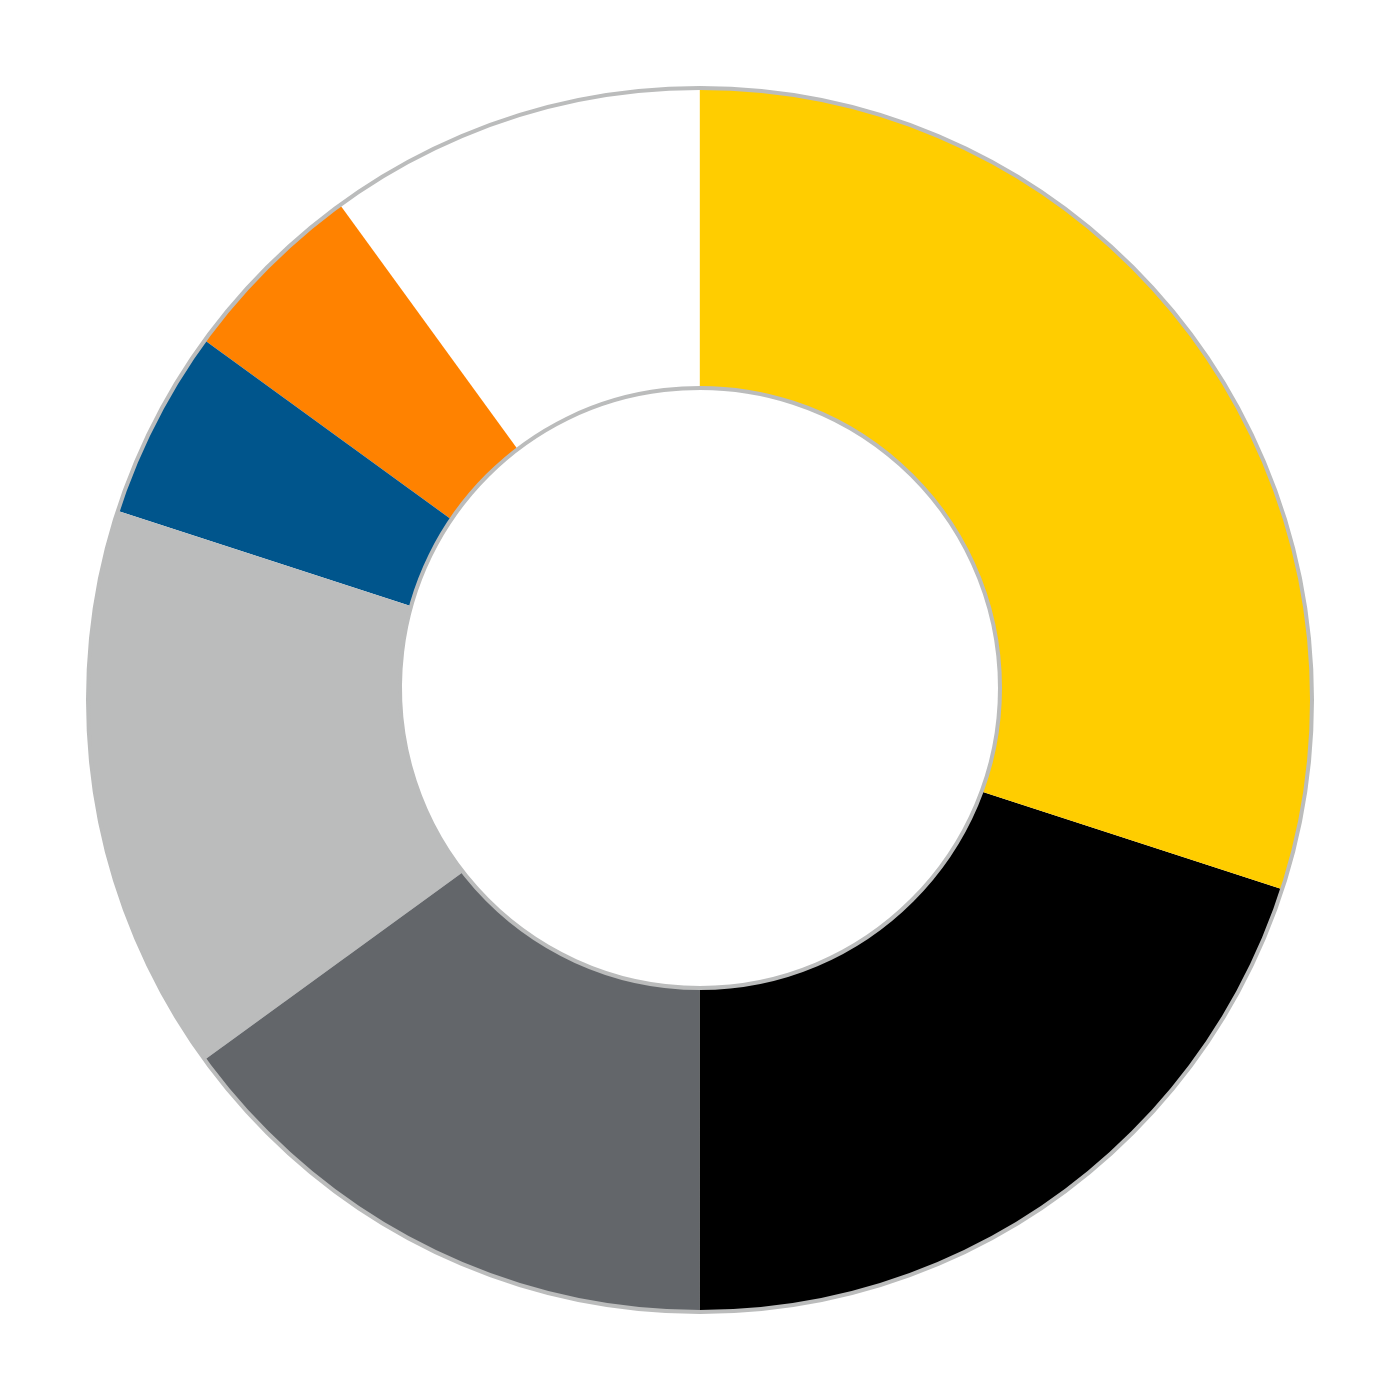 Donut pie chart showing secondary color use